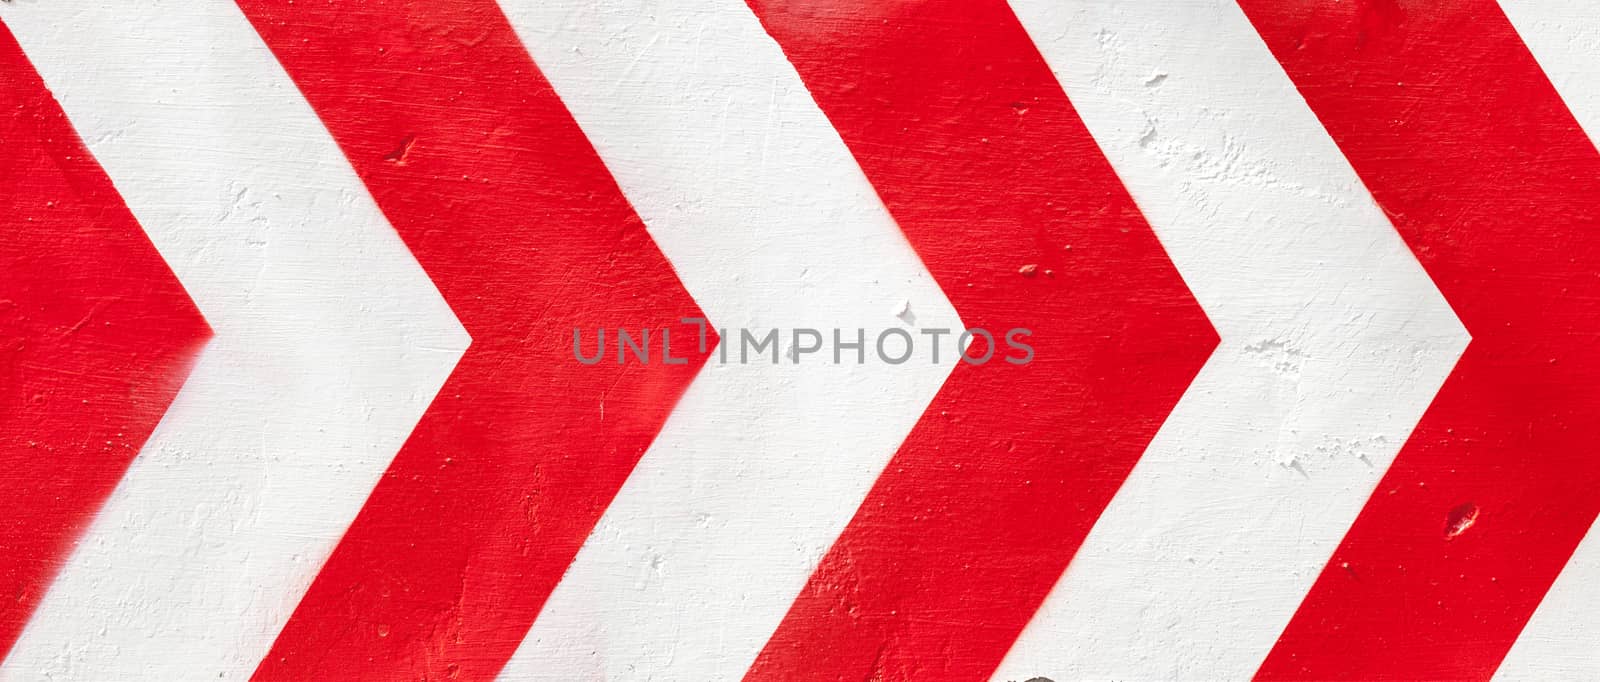 Red and white grunge warning stripes background.